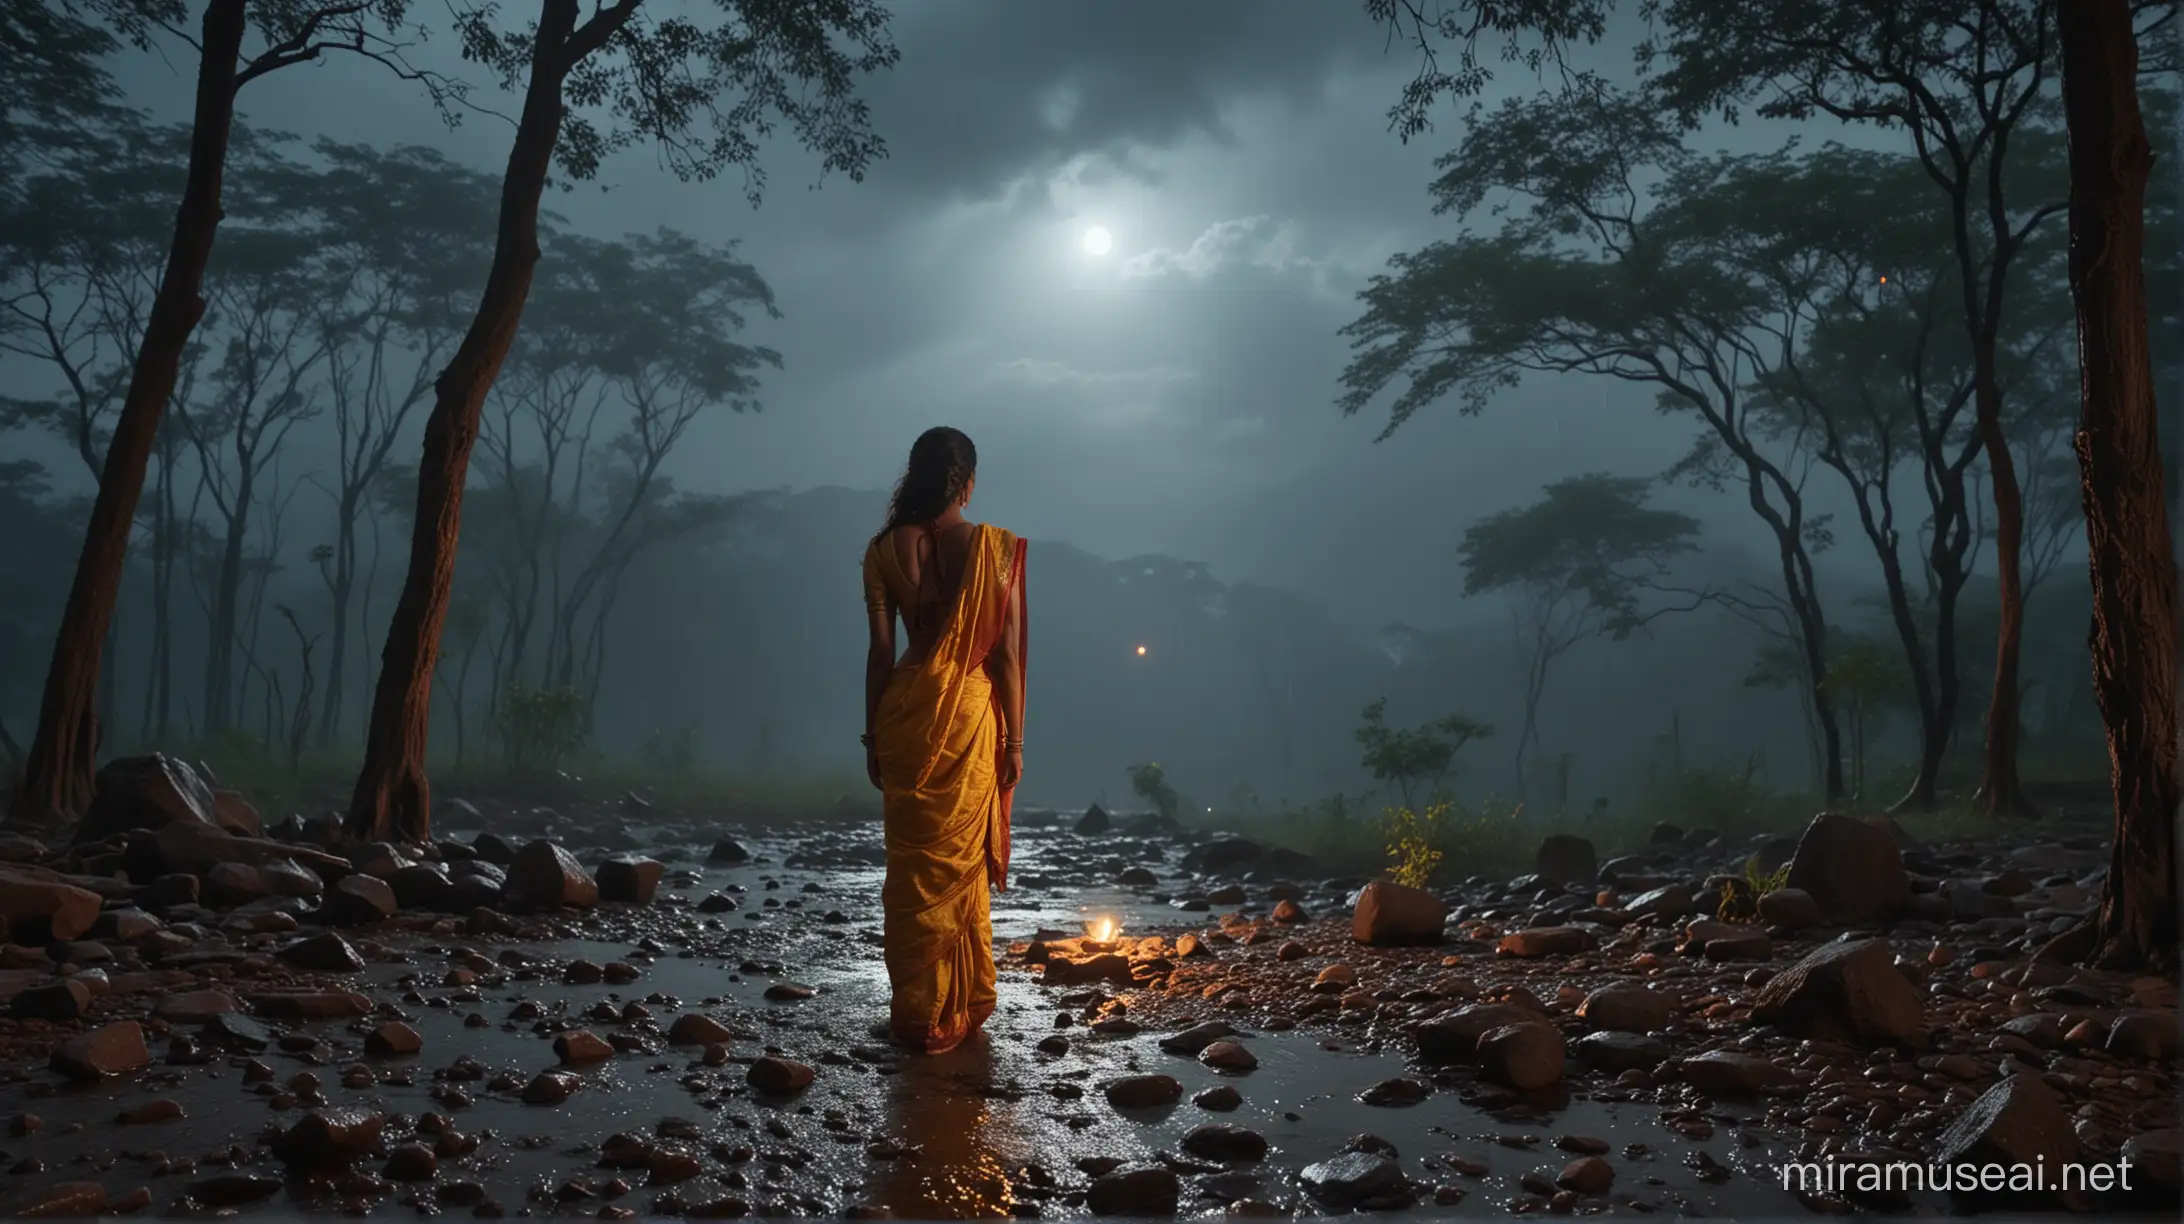 Cinematic Extreme wide full shot of Oval shaped tall Red colored Stone with eyes like Kali Matha ( Ammoru ) in a dense forest during rainy and heavy stormy night. She is worshipped by a young woman with wavy hair, wearing a yellow saree. Her saree is flowing due to the heavy wind. Thunder is hitting the trees behind and sky and clouds are lit by blue moon light. The stone is shining because of the diya in front of it, a foggy and smoky background. High contrast, high saturation. Shot on IMAX 70mm. Event is reflected in the water on the muddy ground due to the rain. Dramatic background